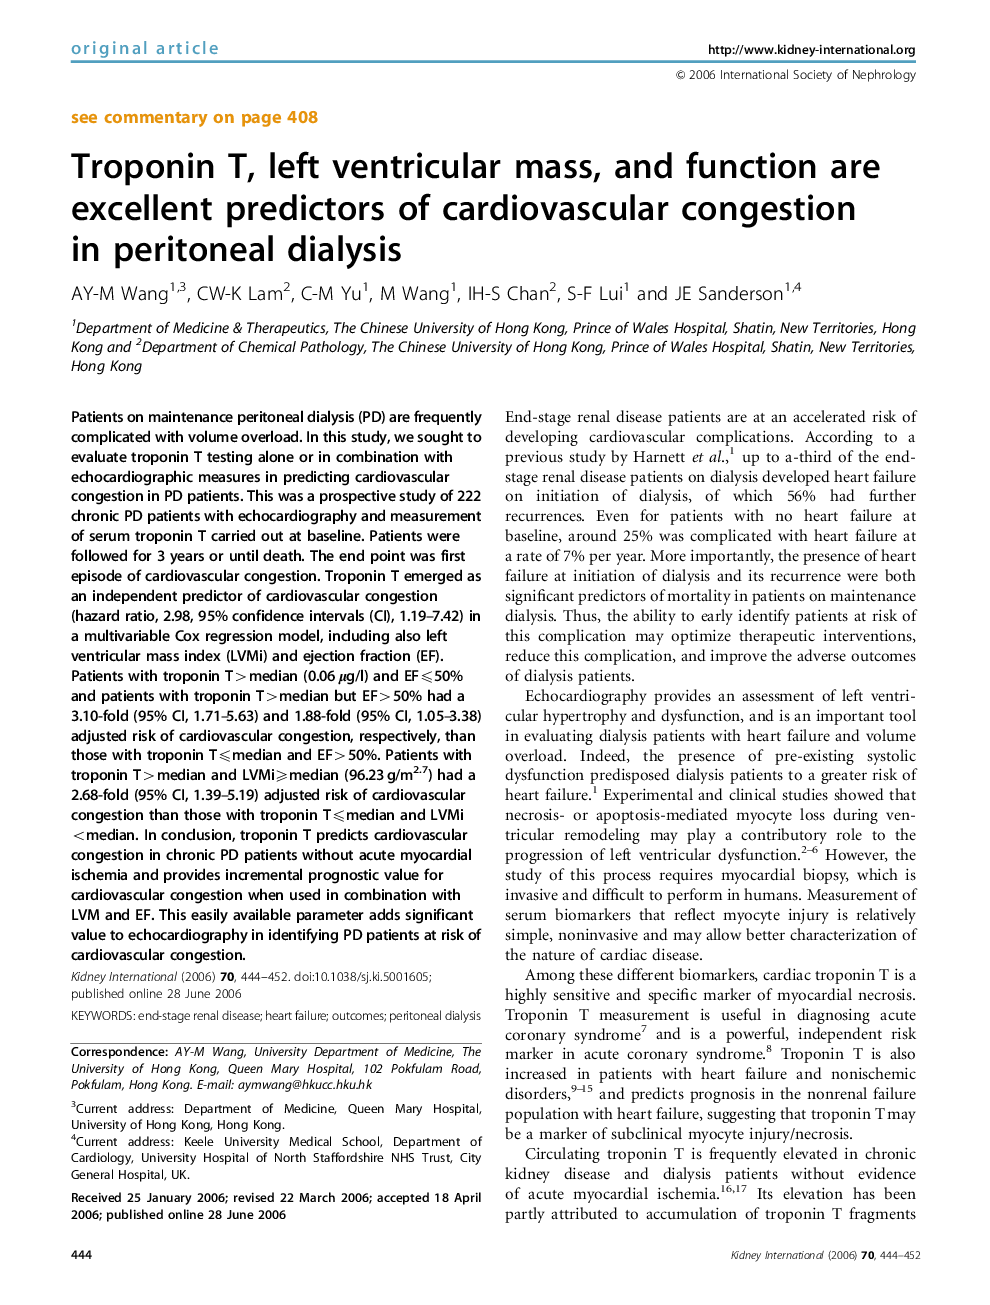 Troponin T, left ventricular mass, and function are excellent predictors of cardiovascular congestion in peritoneal dialysis